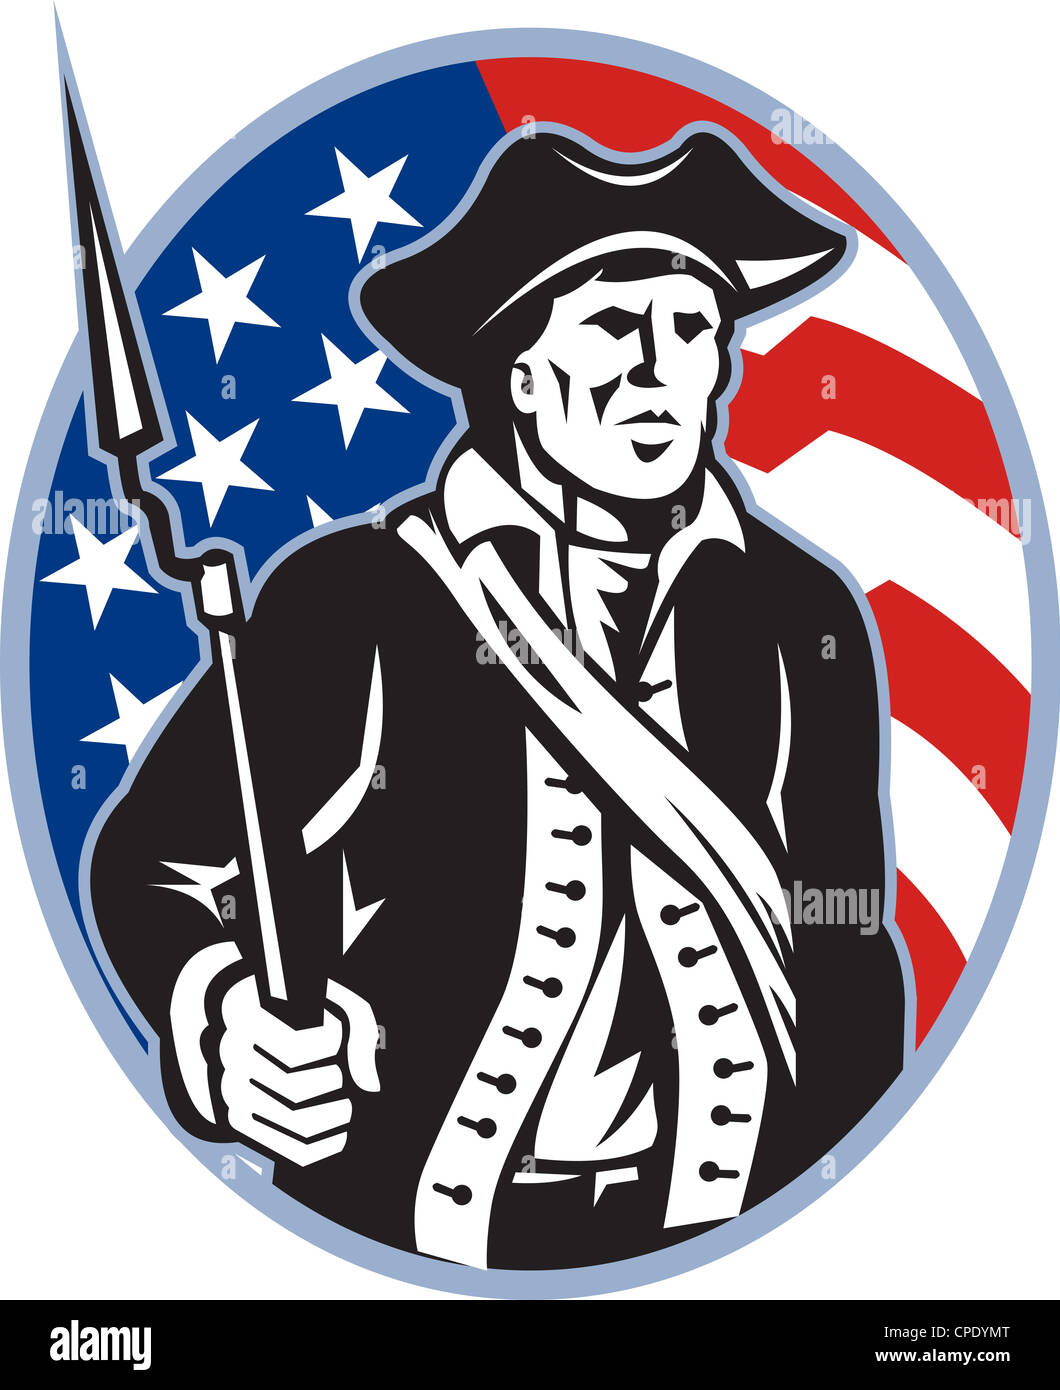 American Patriot Revolutionary Soldier with Musket Rifle Front